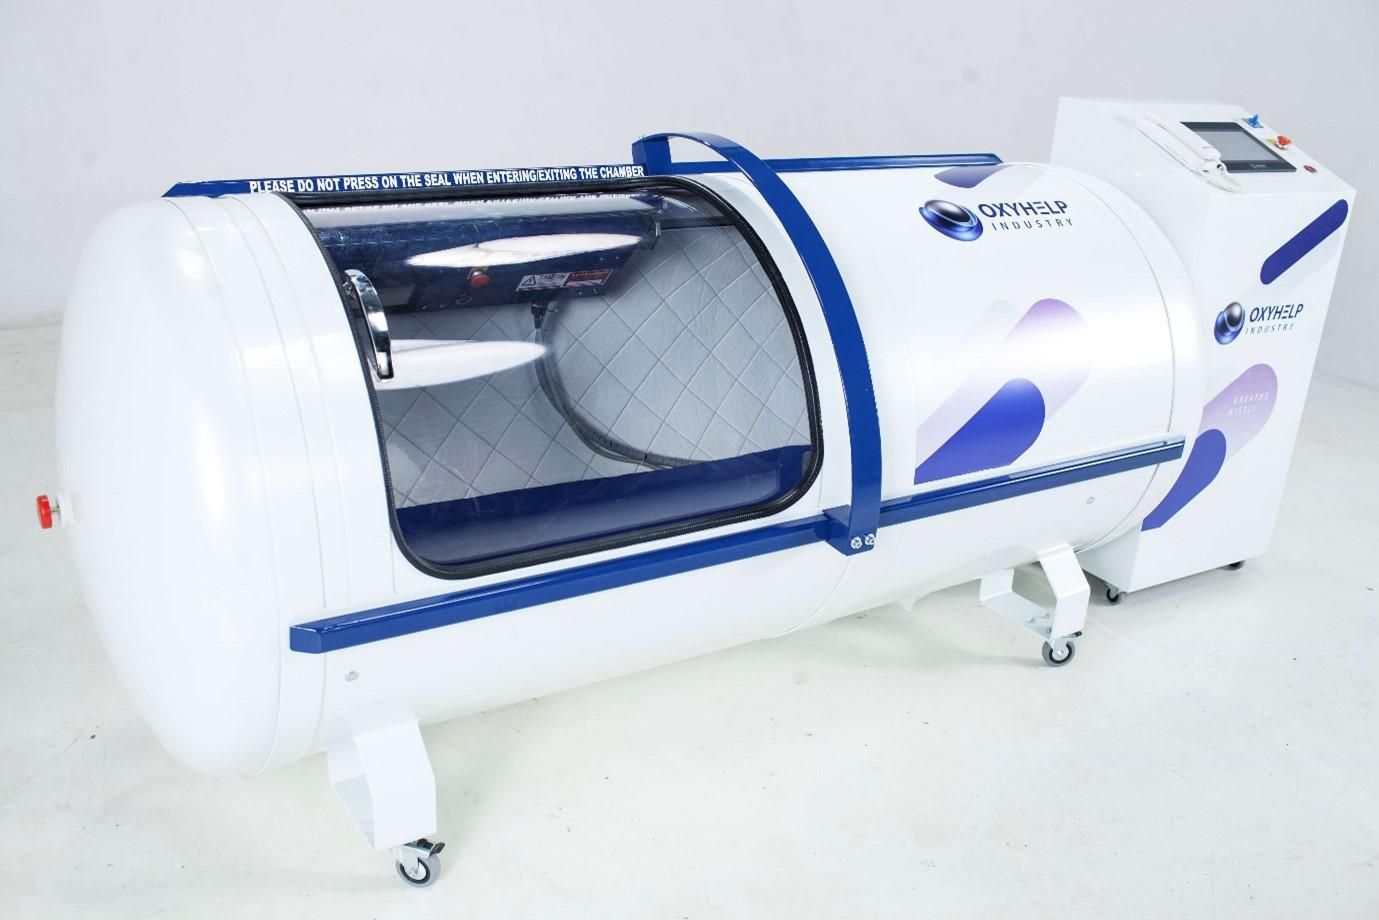 What are the benefits of hyperbaric oxygen intake during major exercise sessions